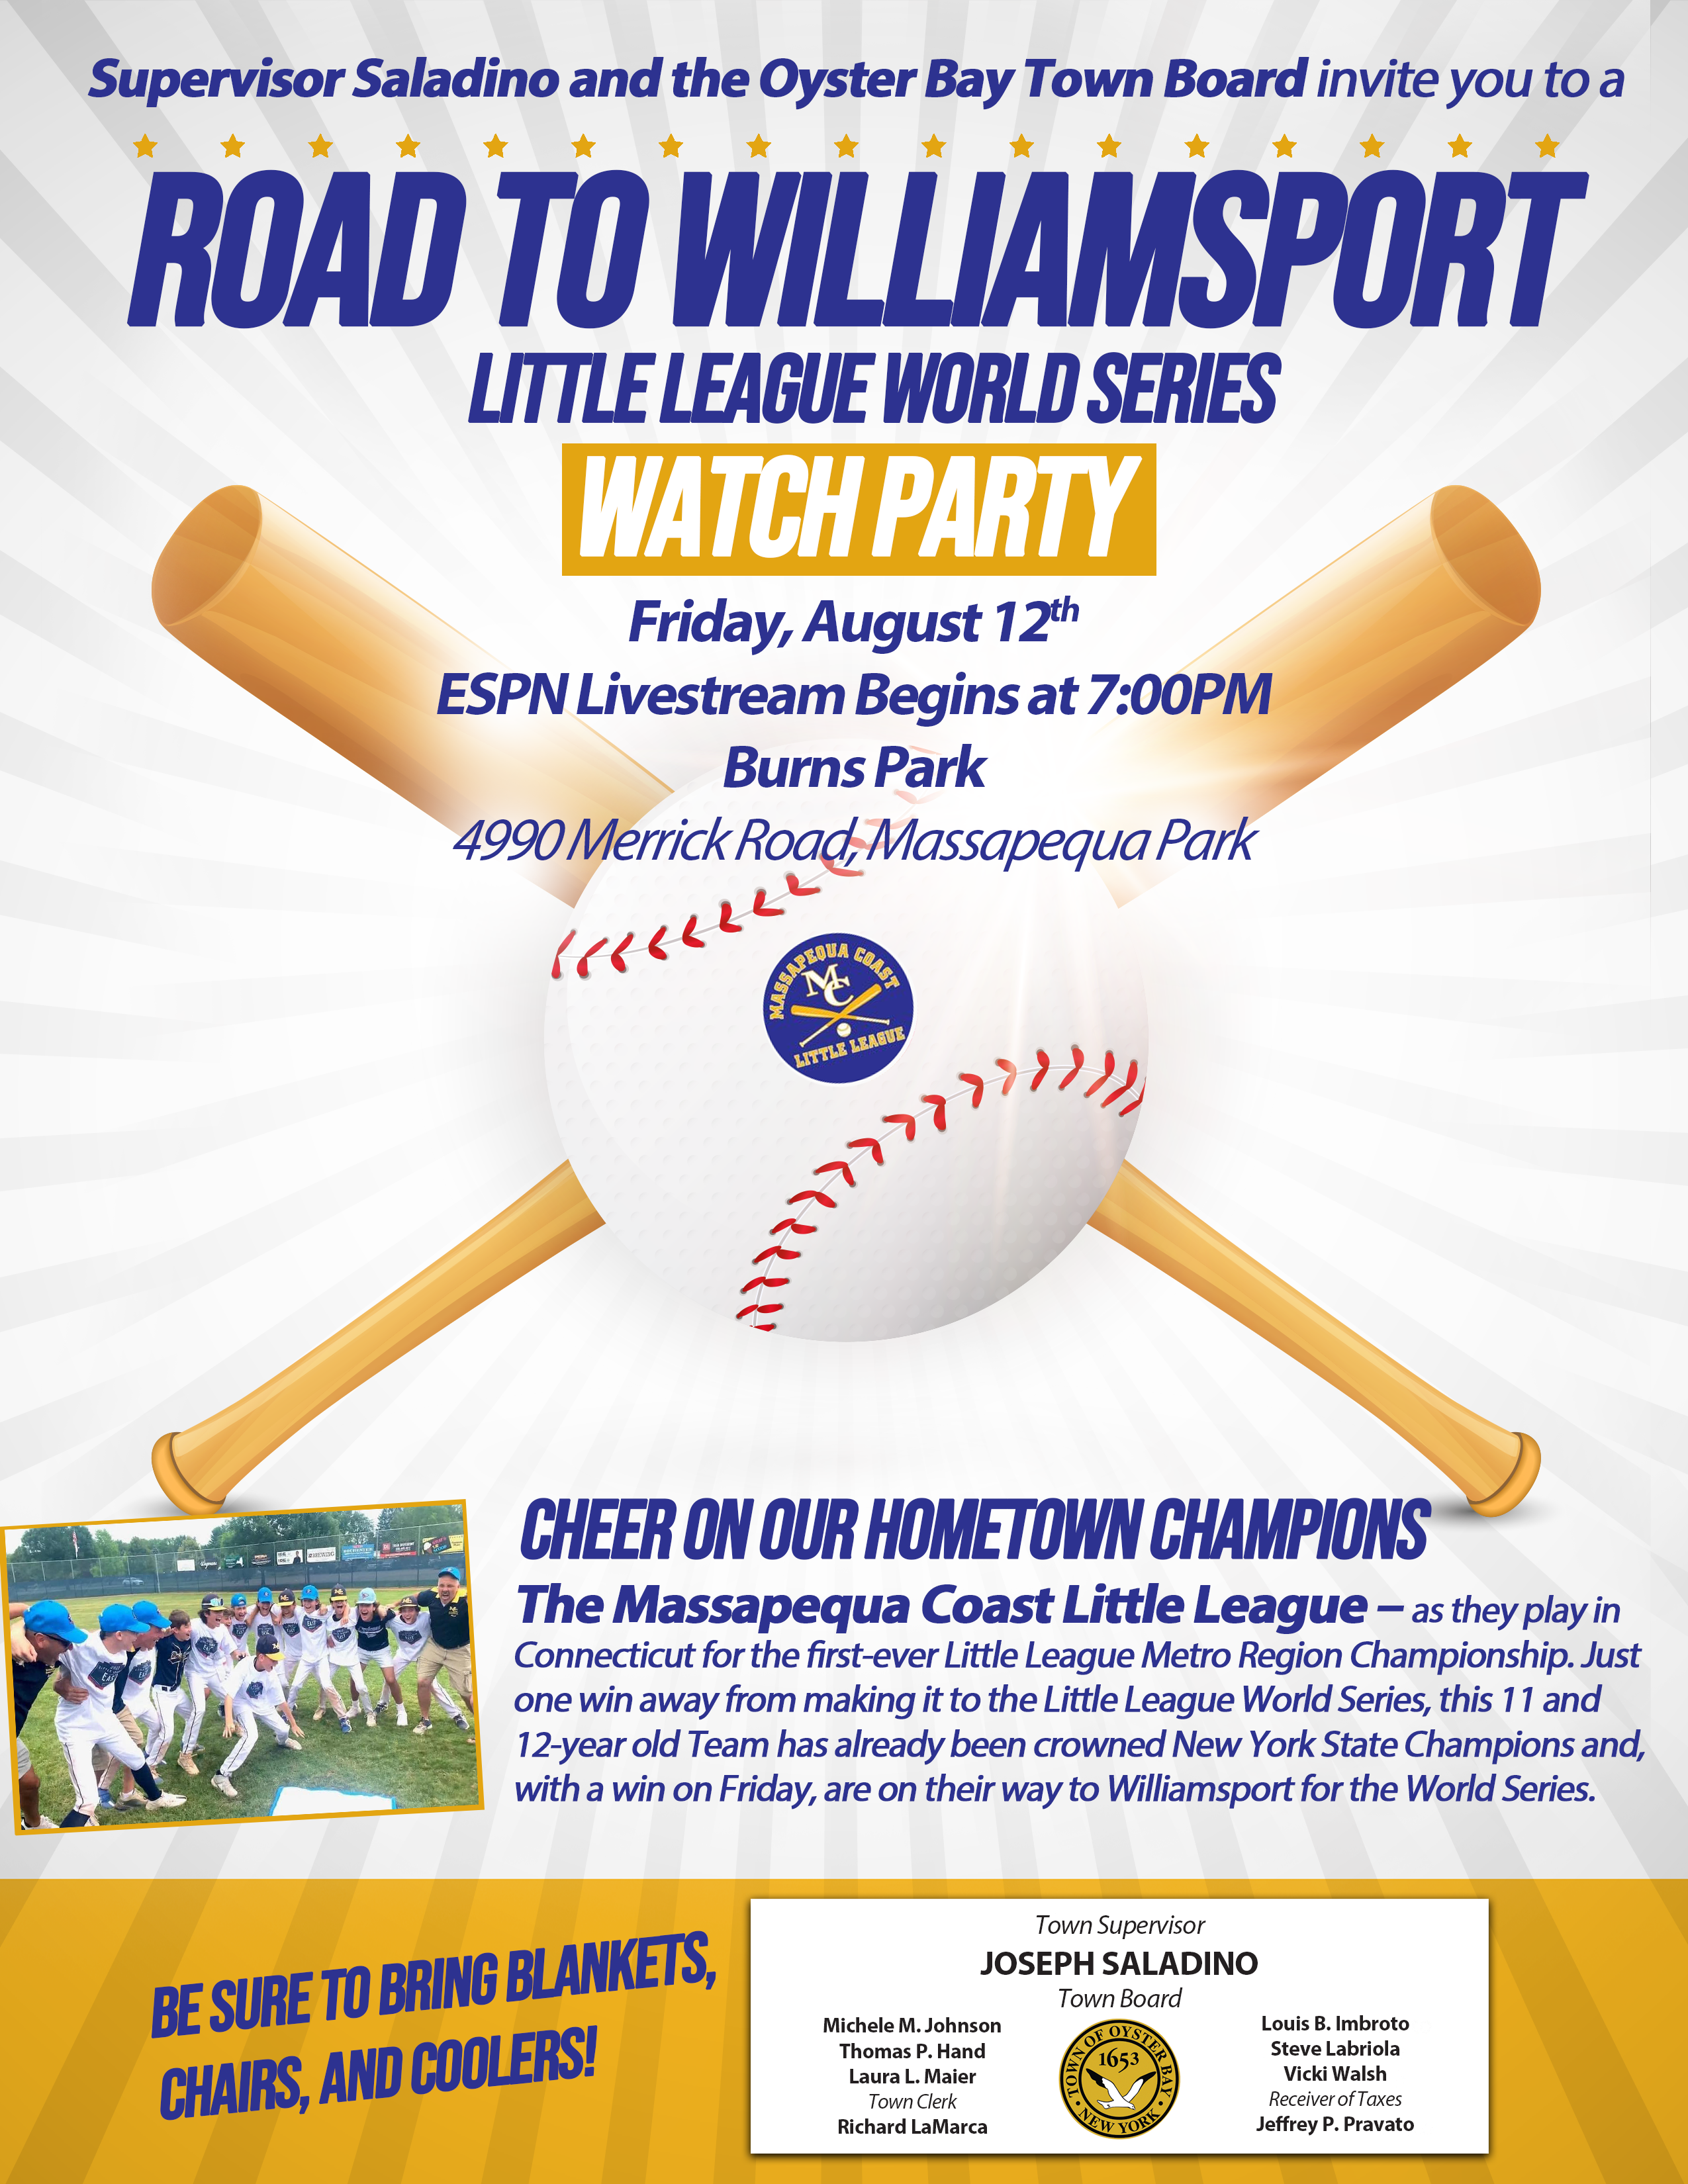 Road to Williamsport” Little League World Series Watch Party